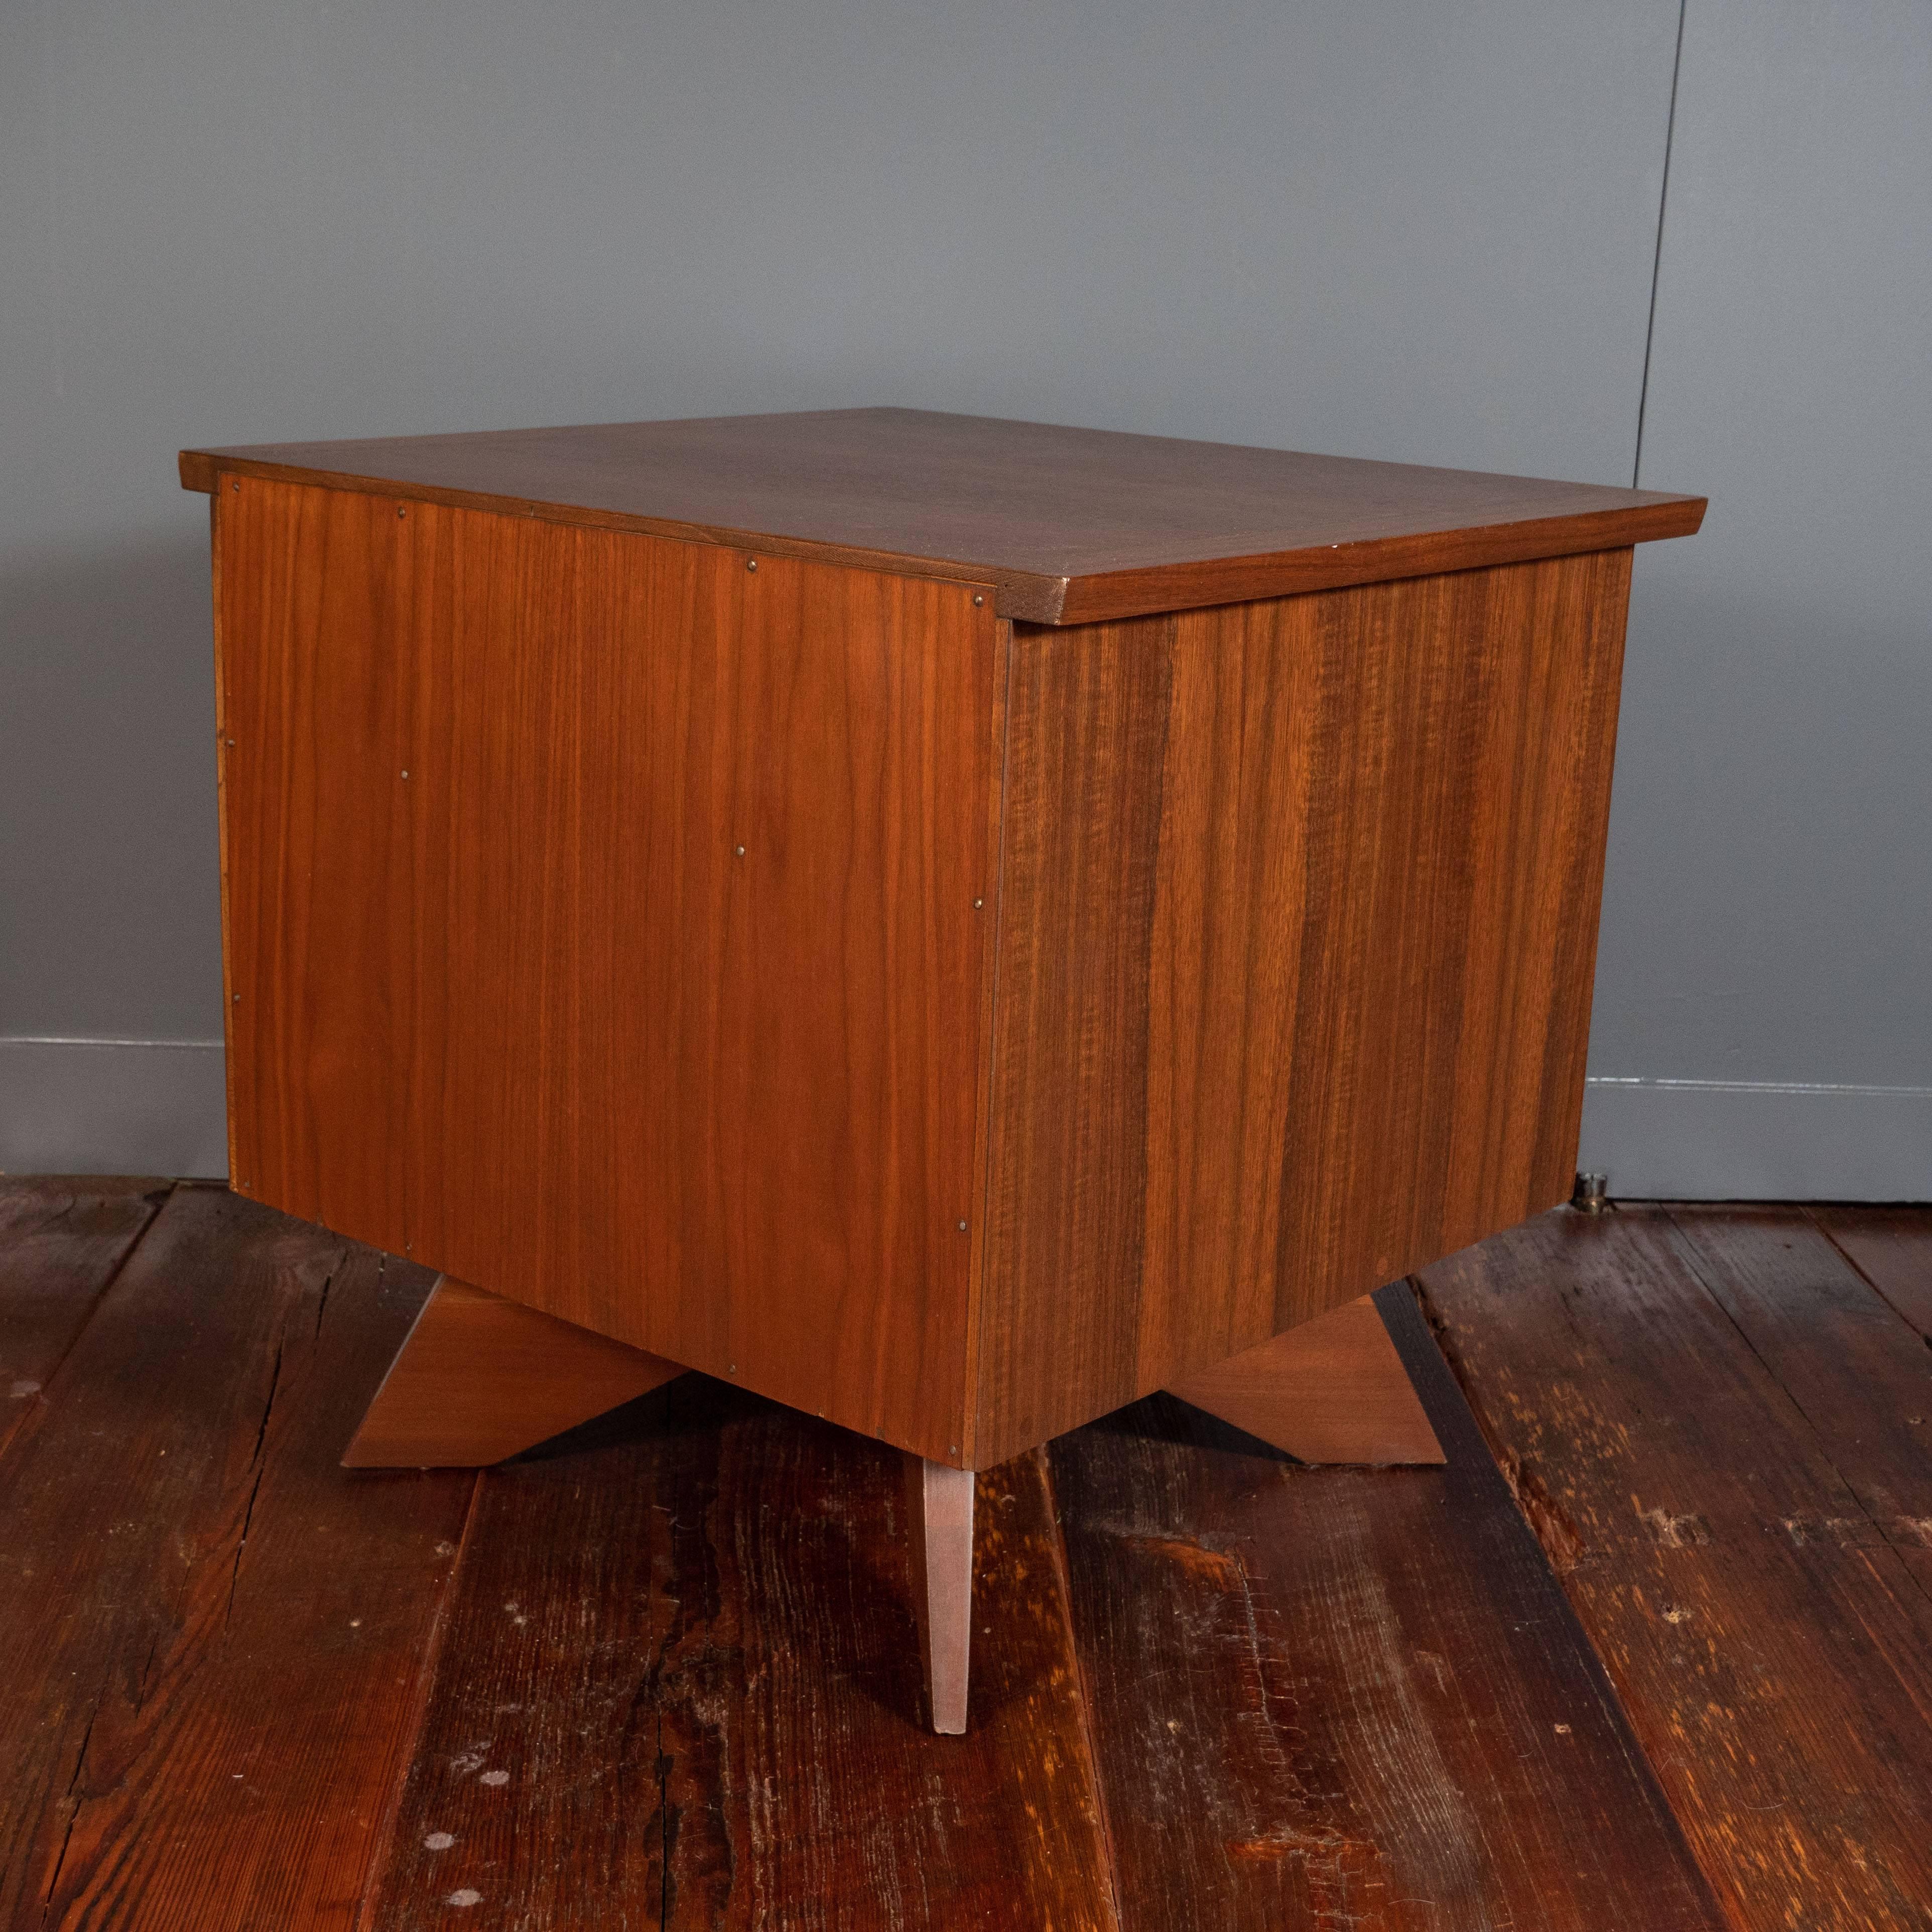 Midcentury Walnut Side Table by George Nakashima for Widdicomb Furniture Co. 3